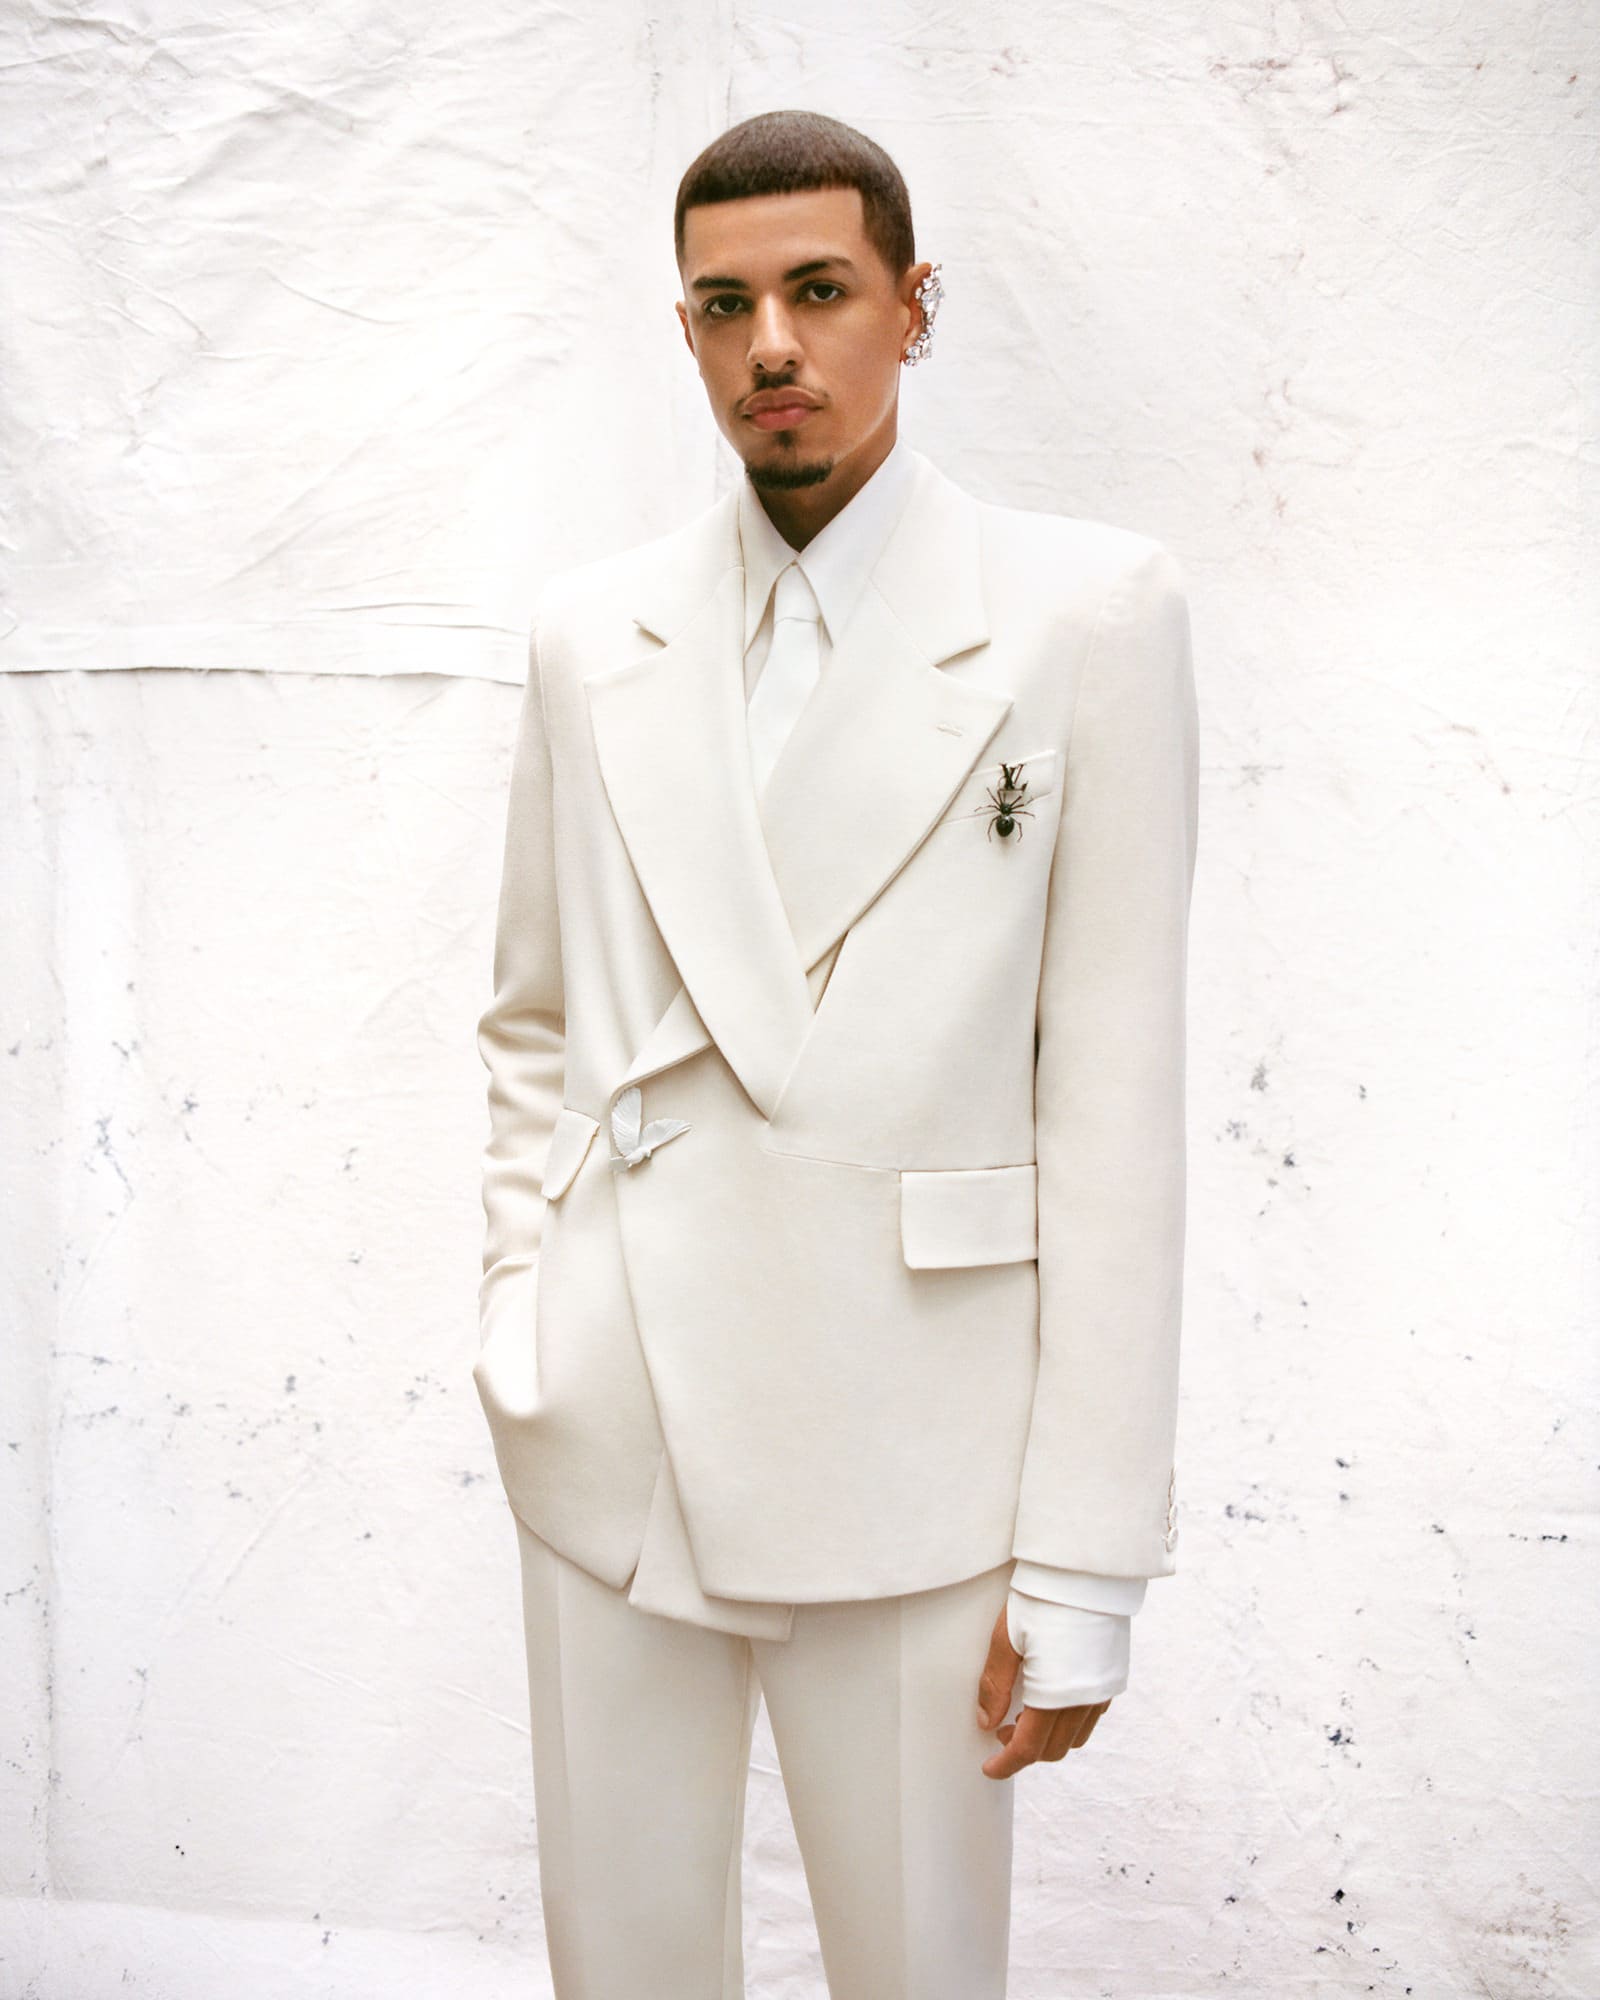 The Capitalist Touch: The Formal And Informal White Suit - Louis Vuitton